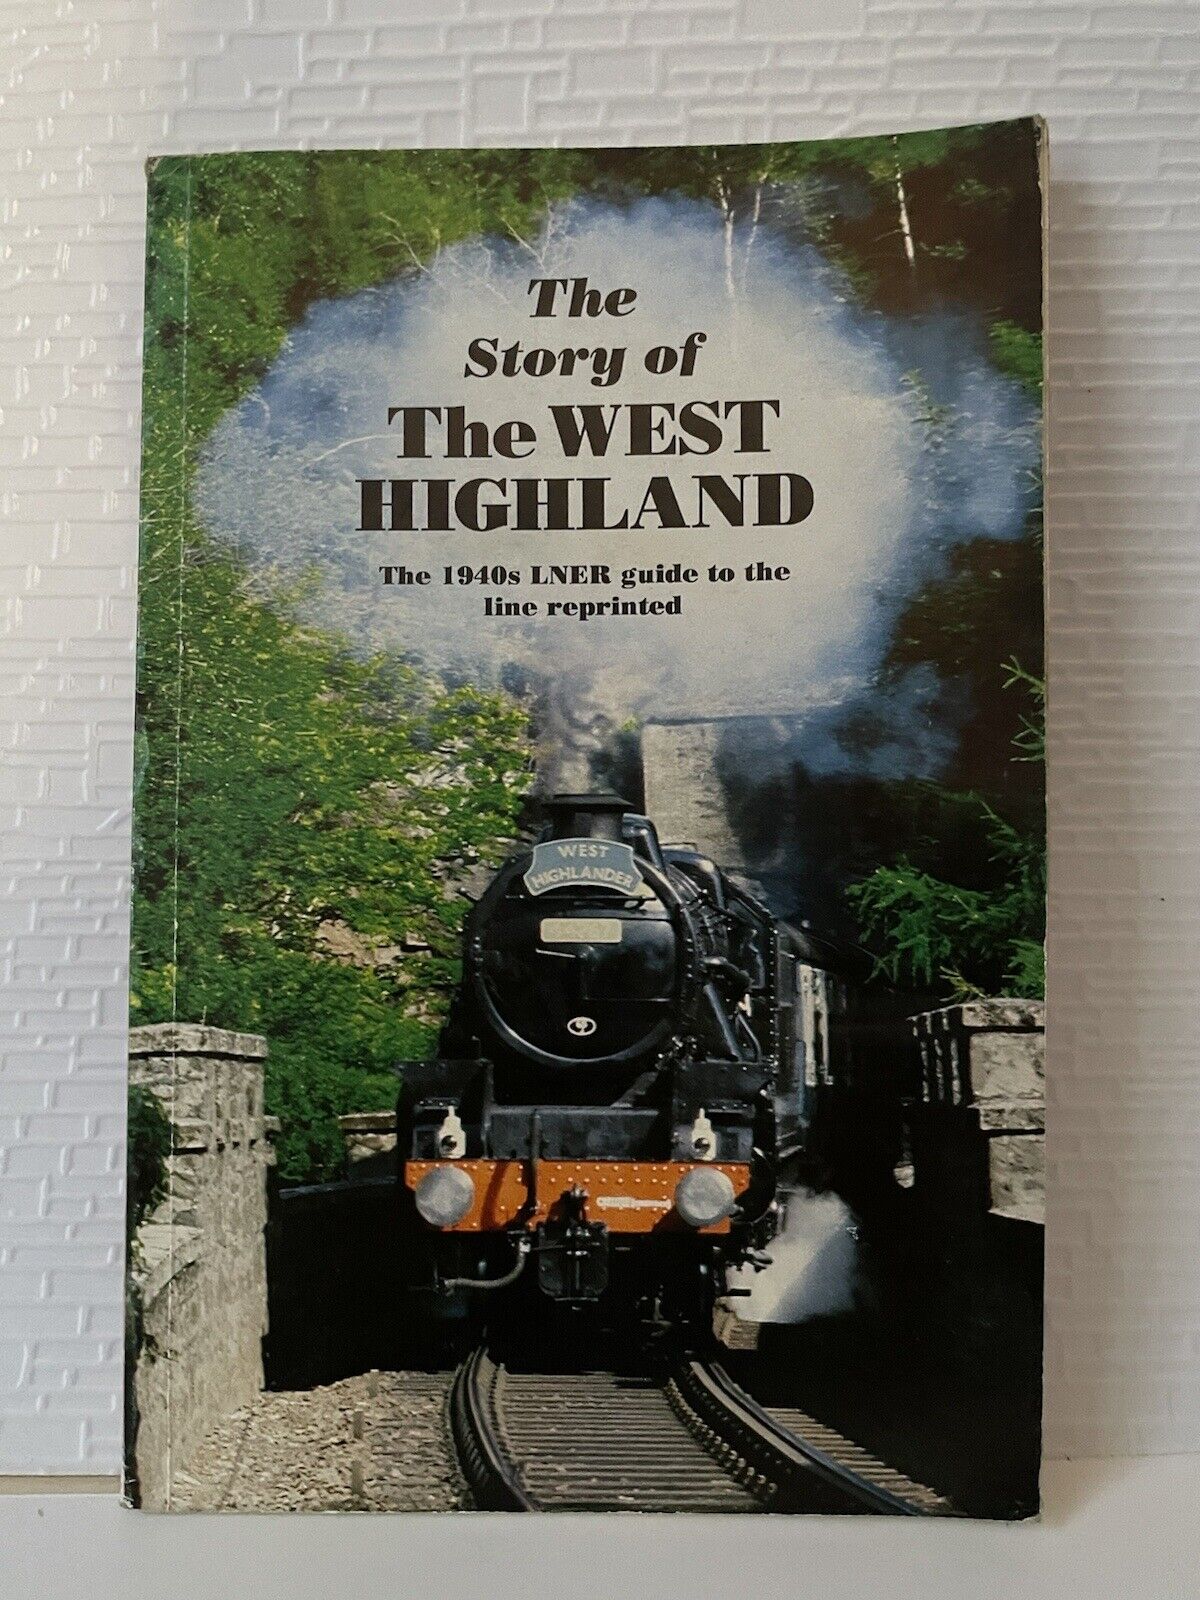 The Story Of The West Highland (Reprinted 1940’s LNER)